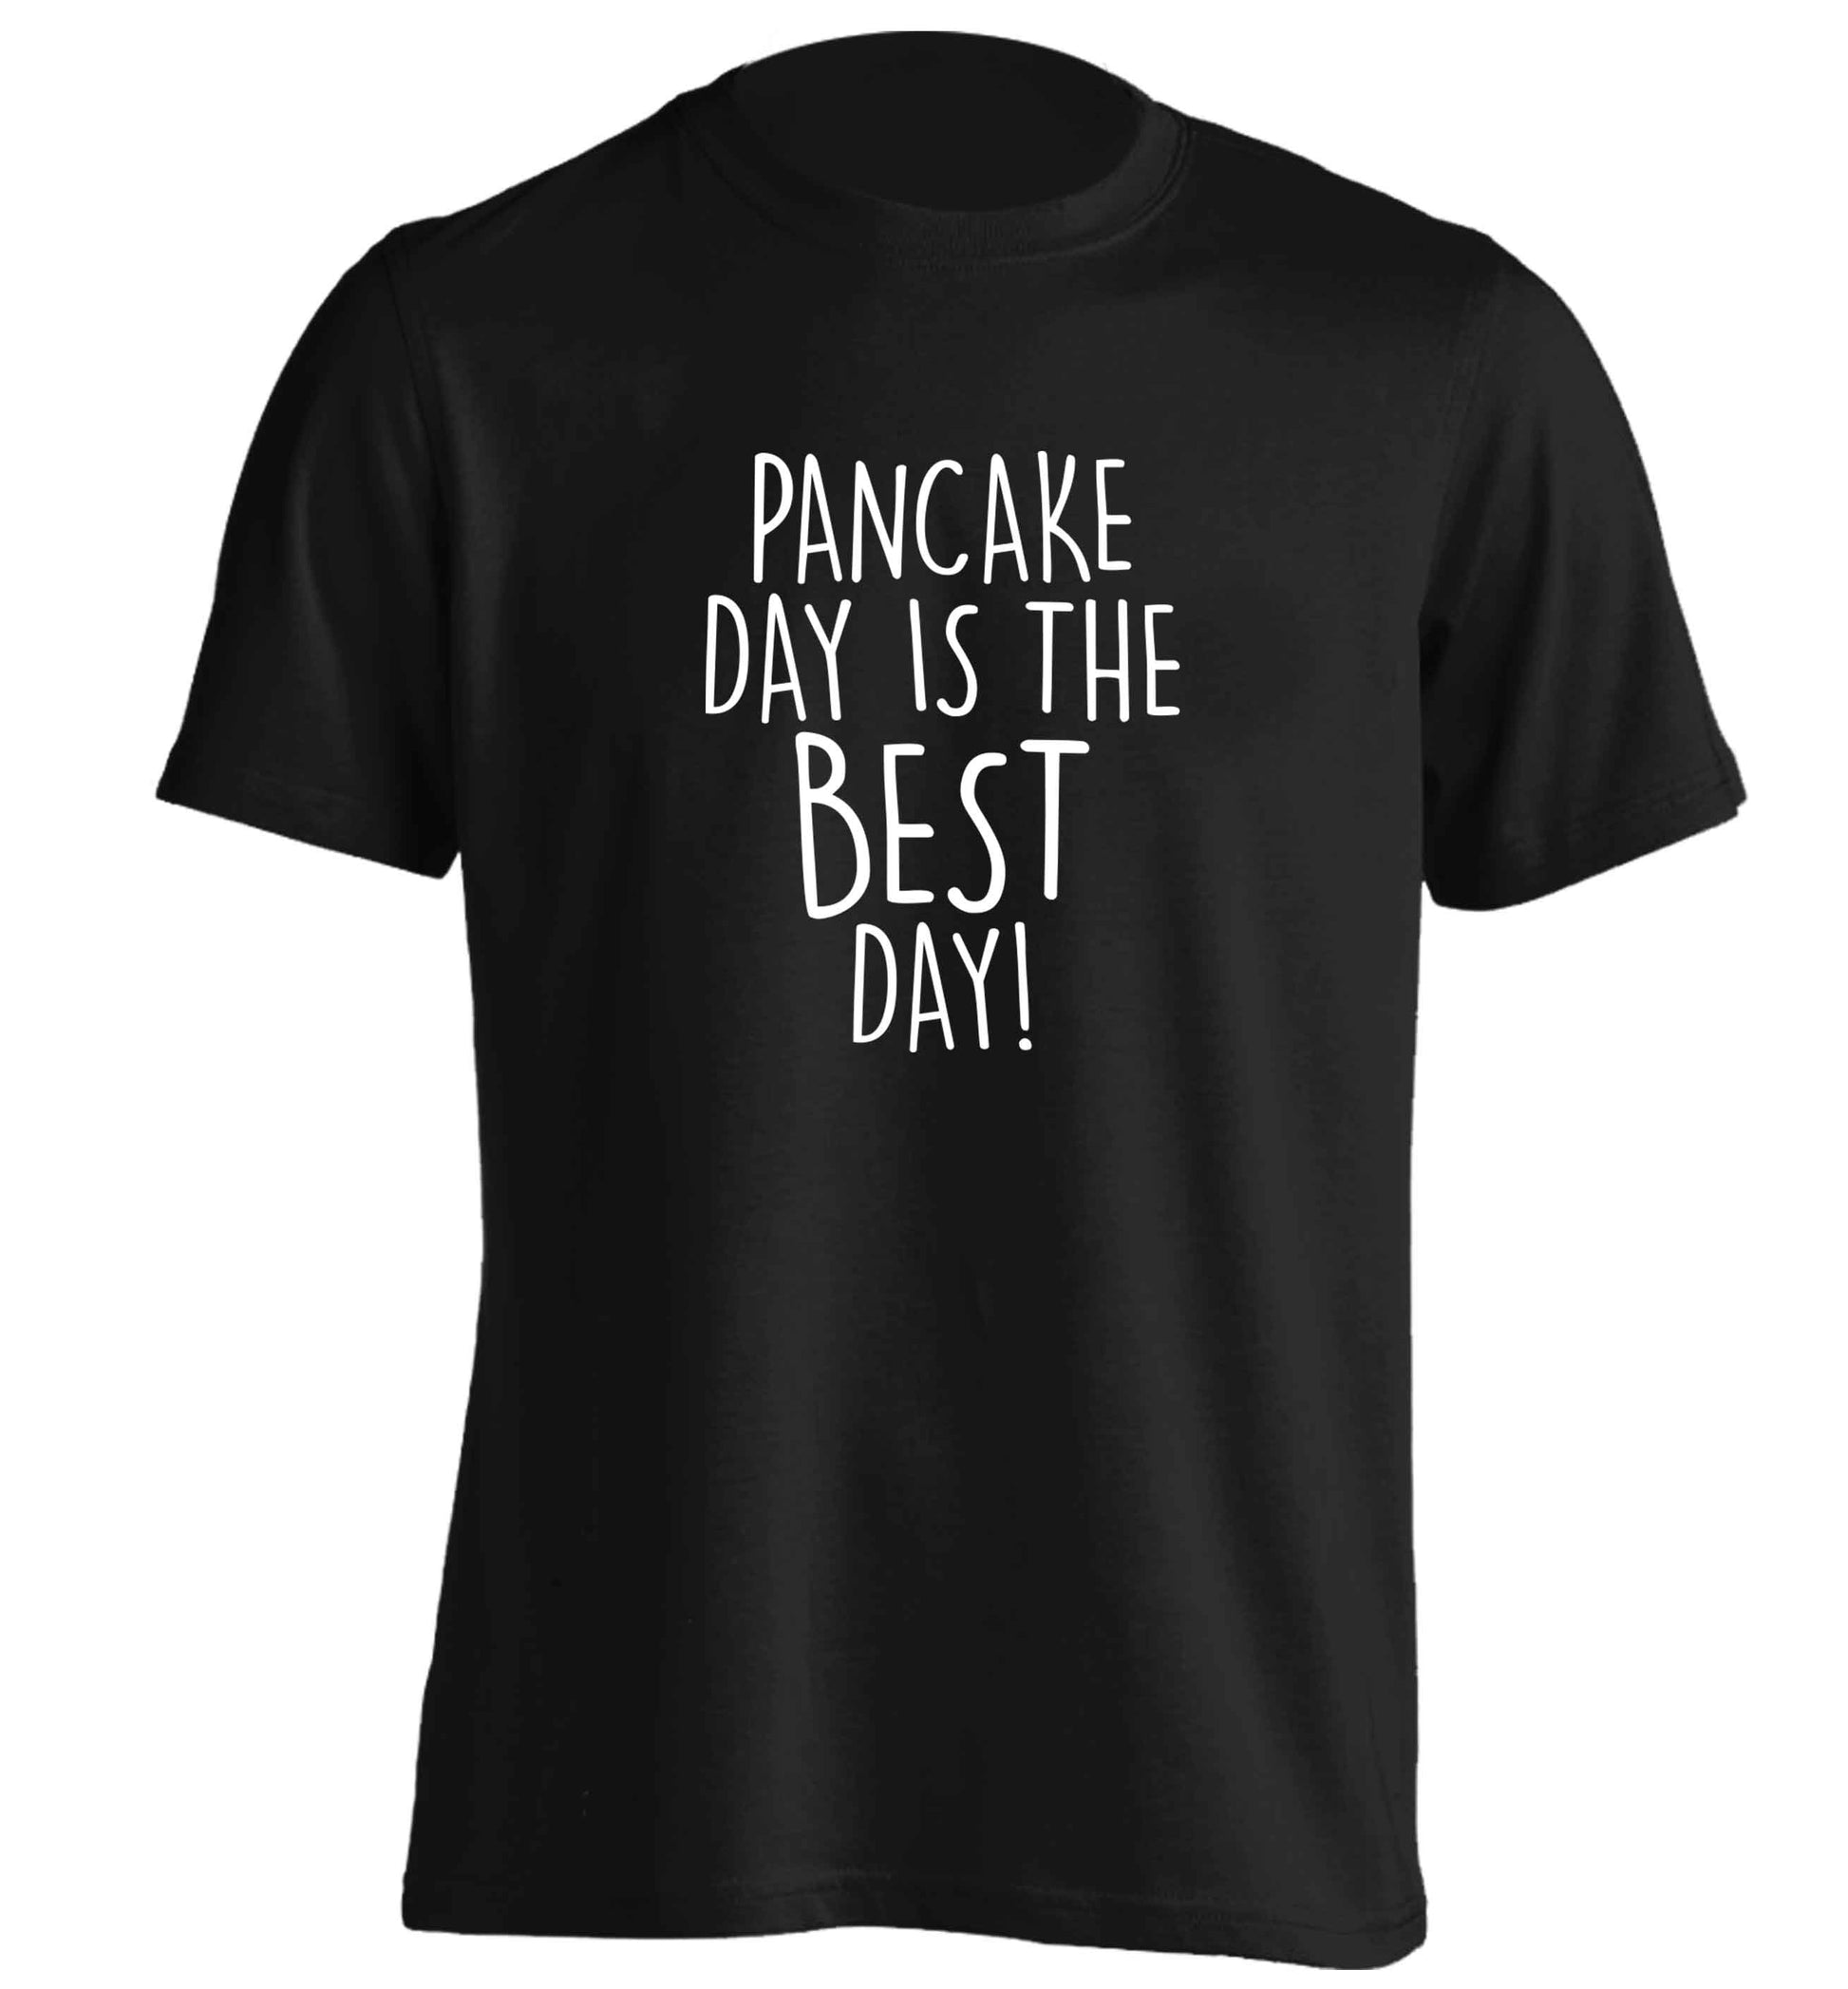 Pancake day is the best day adults unisex black Tshirt 2XL